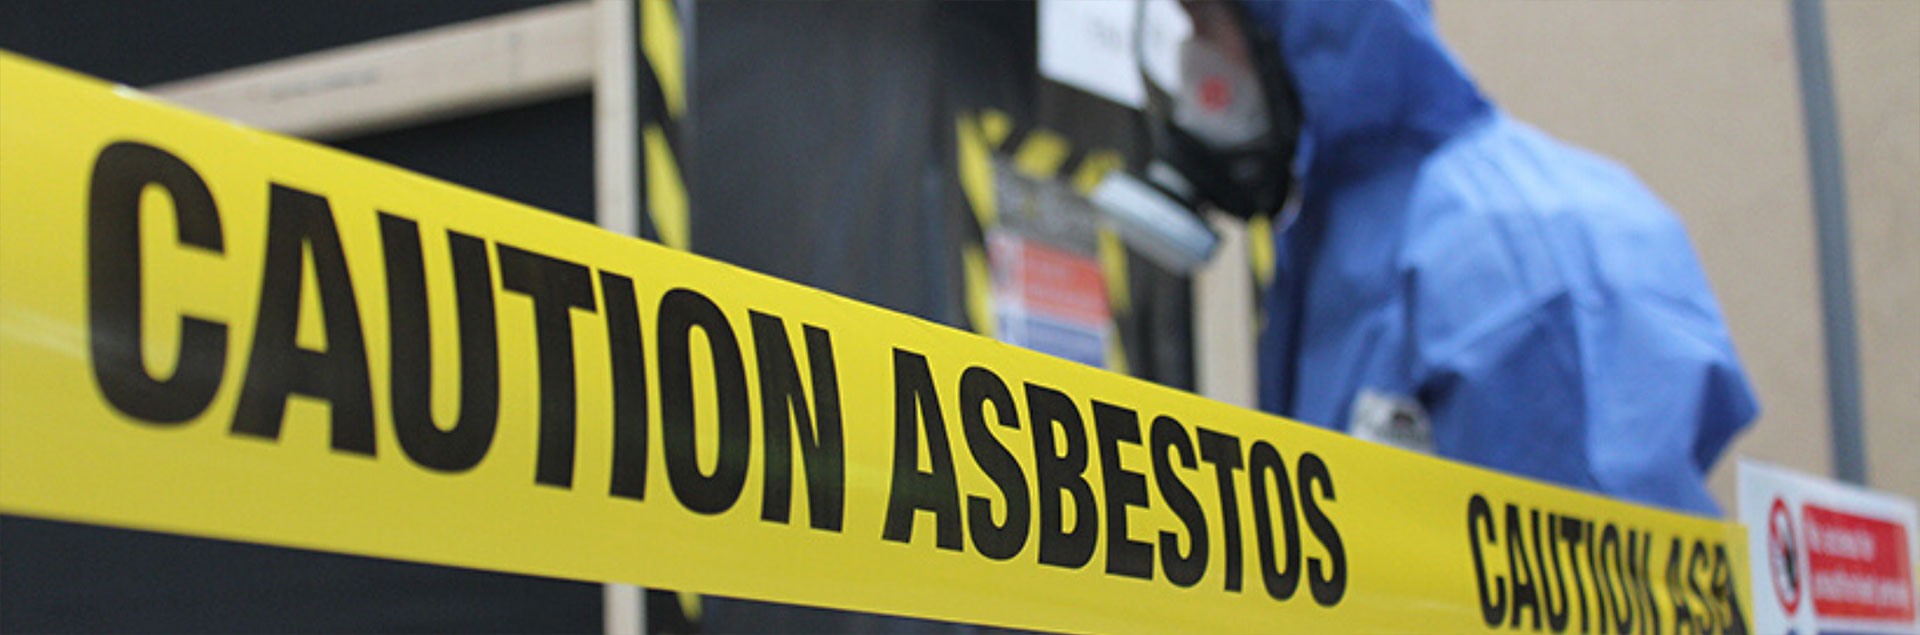 About Asbestos Removal